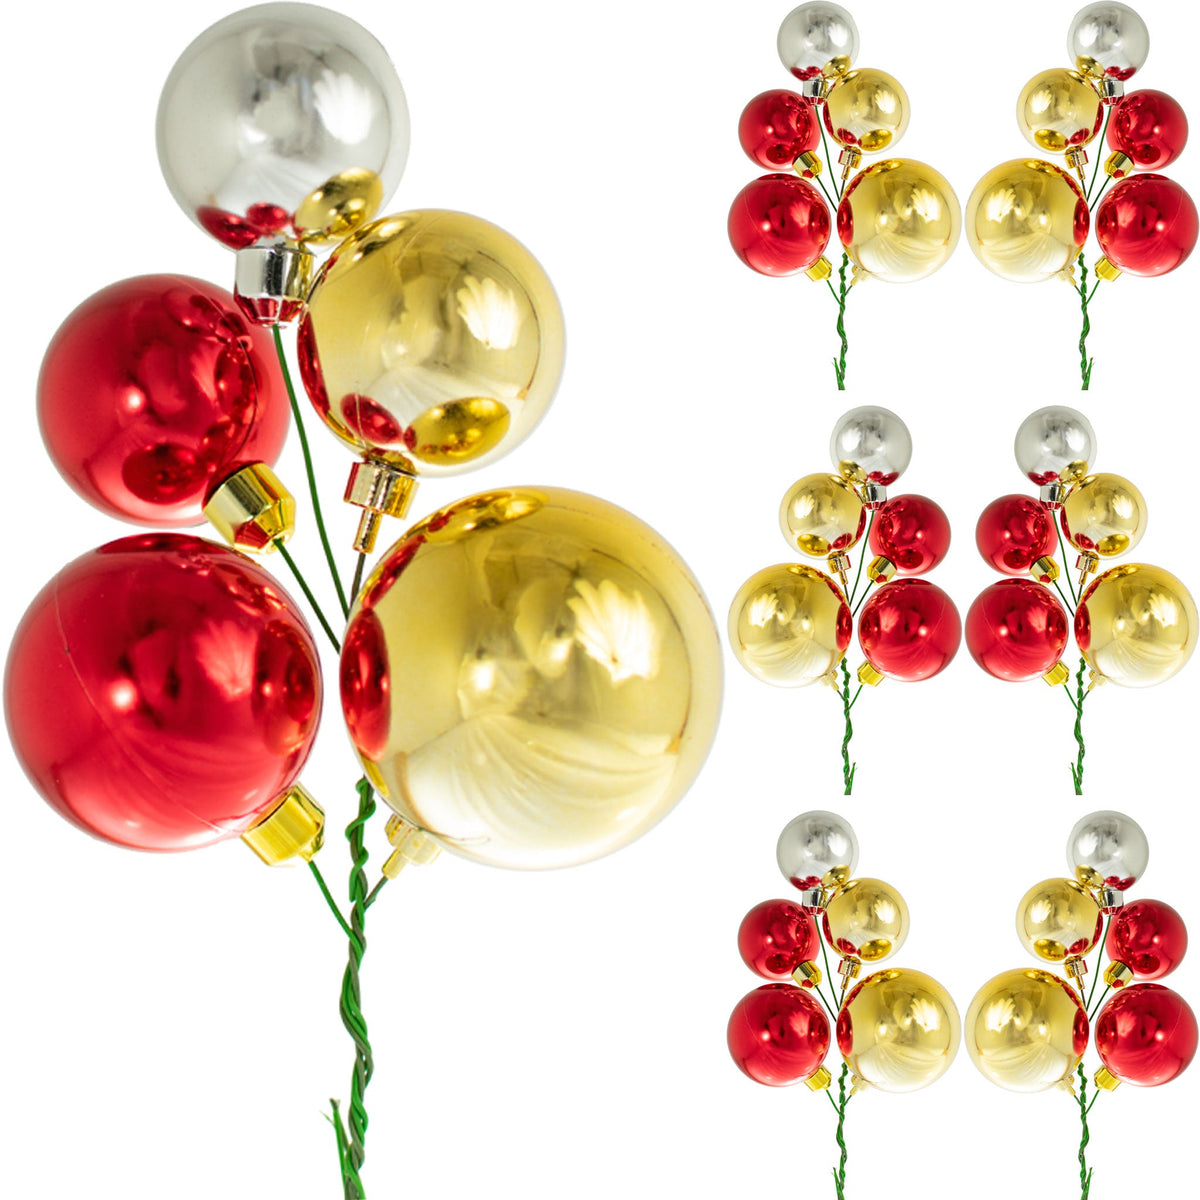 Red, Gold, and Silver Ball Ornament Clusters sold in packs of 6 from Lee Display